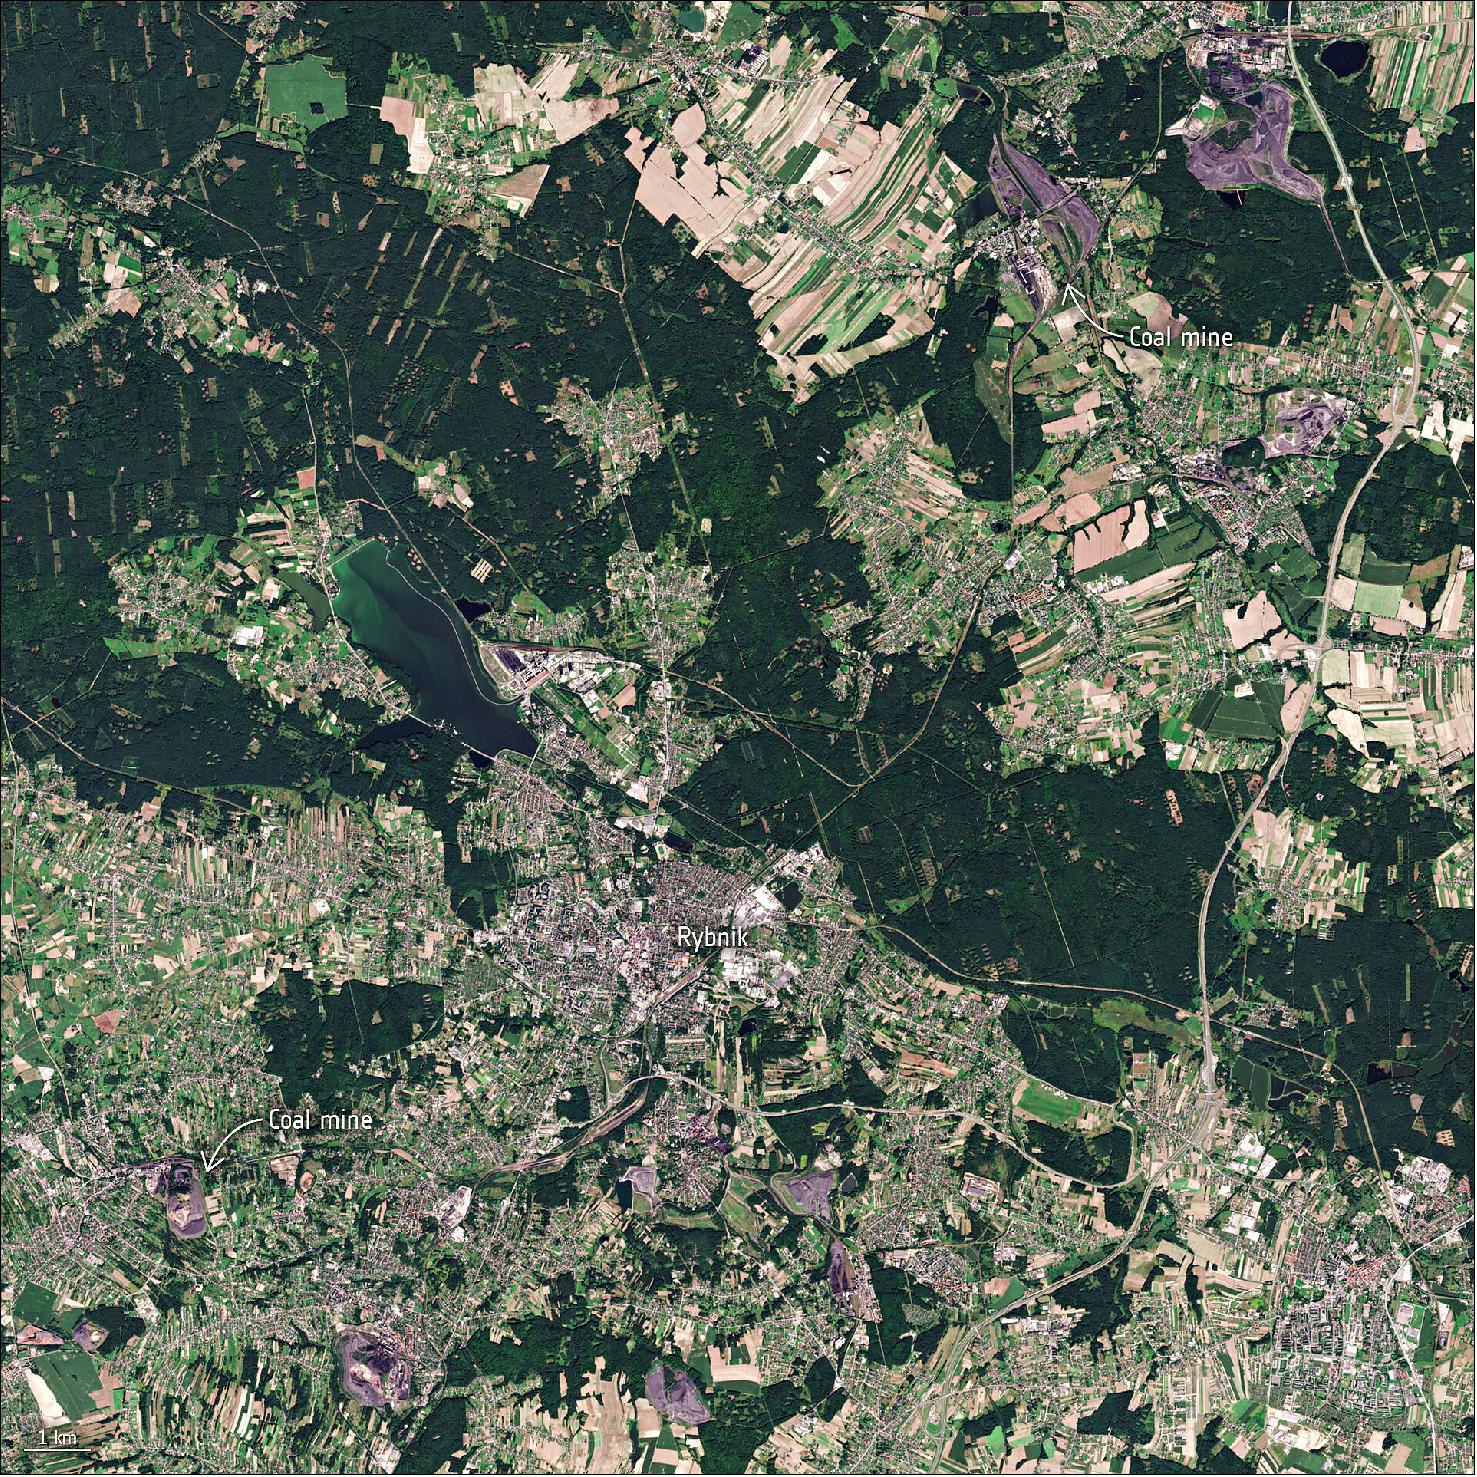 Figure 25: This Copernicus Sentinel-2 image shows us Rybnik, located southwest of Katowice, with several coal mines visible in the nearby surroundings (image credit: ESA, this image contains modified Copernicus Sentinel data (2021), data processed by ESA, CC BY-SA 3.0 IGO)